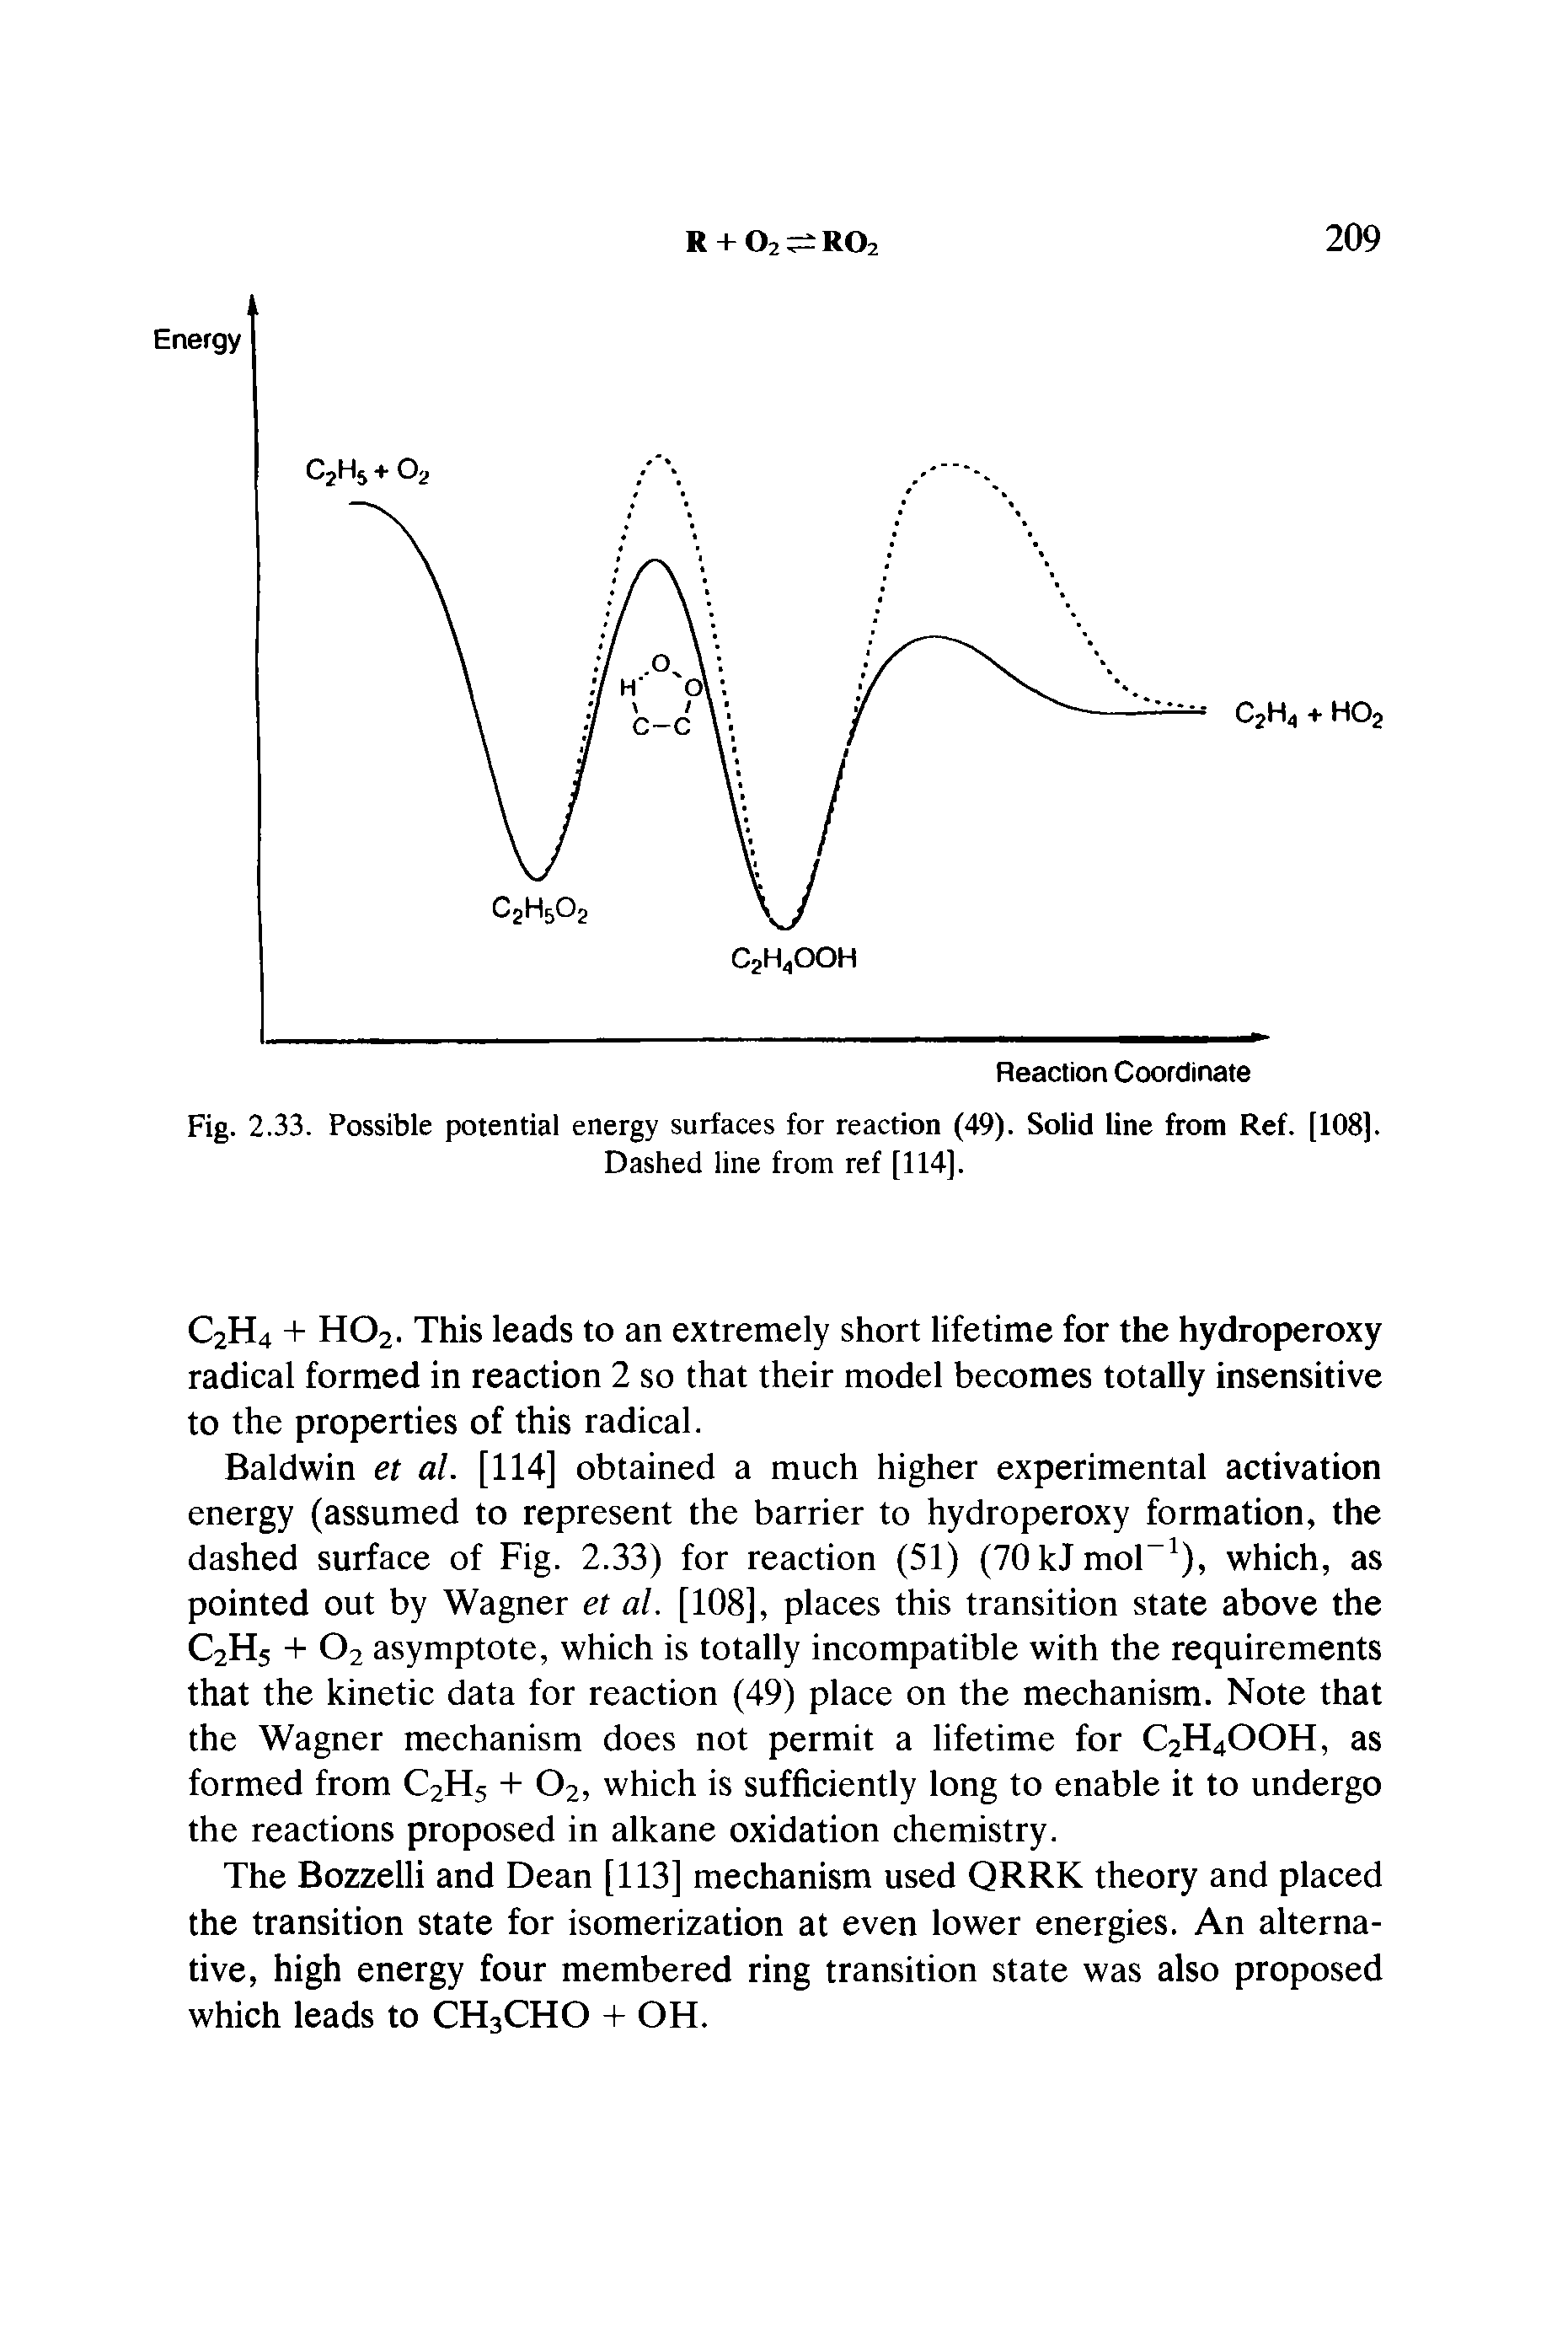 Fig. 2.33. Possible potential energy surfaces for reaction (49). Solid line from Ref. [108).